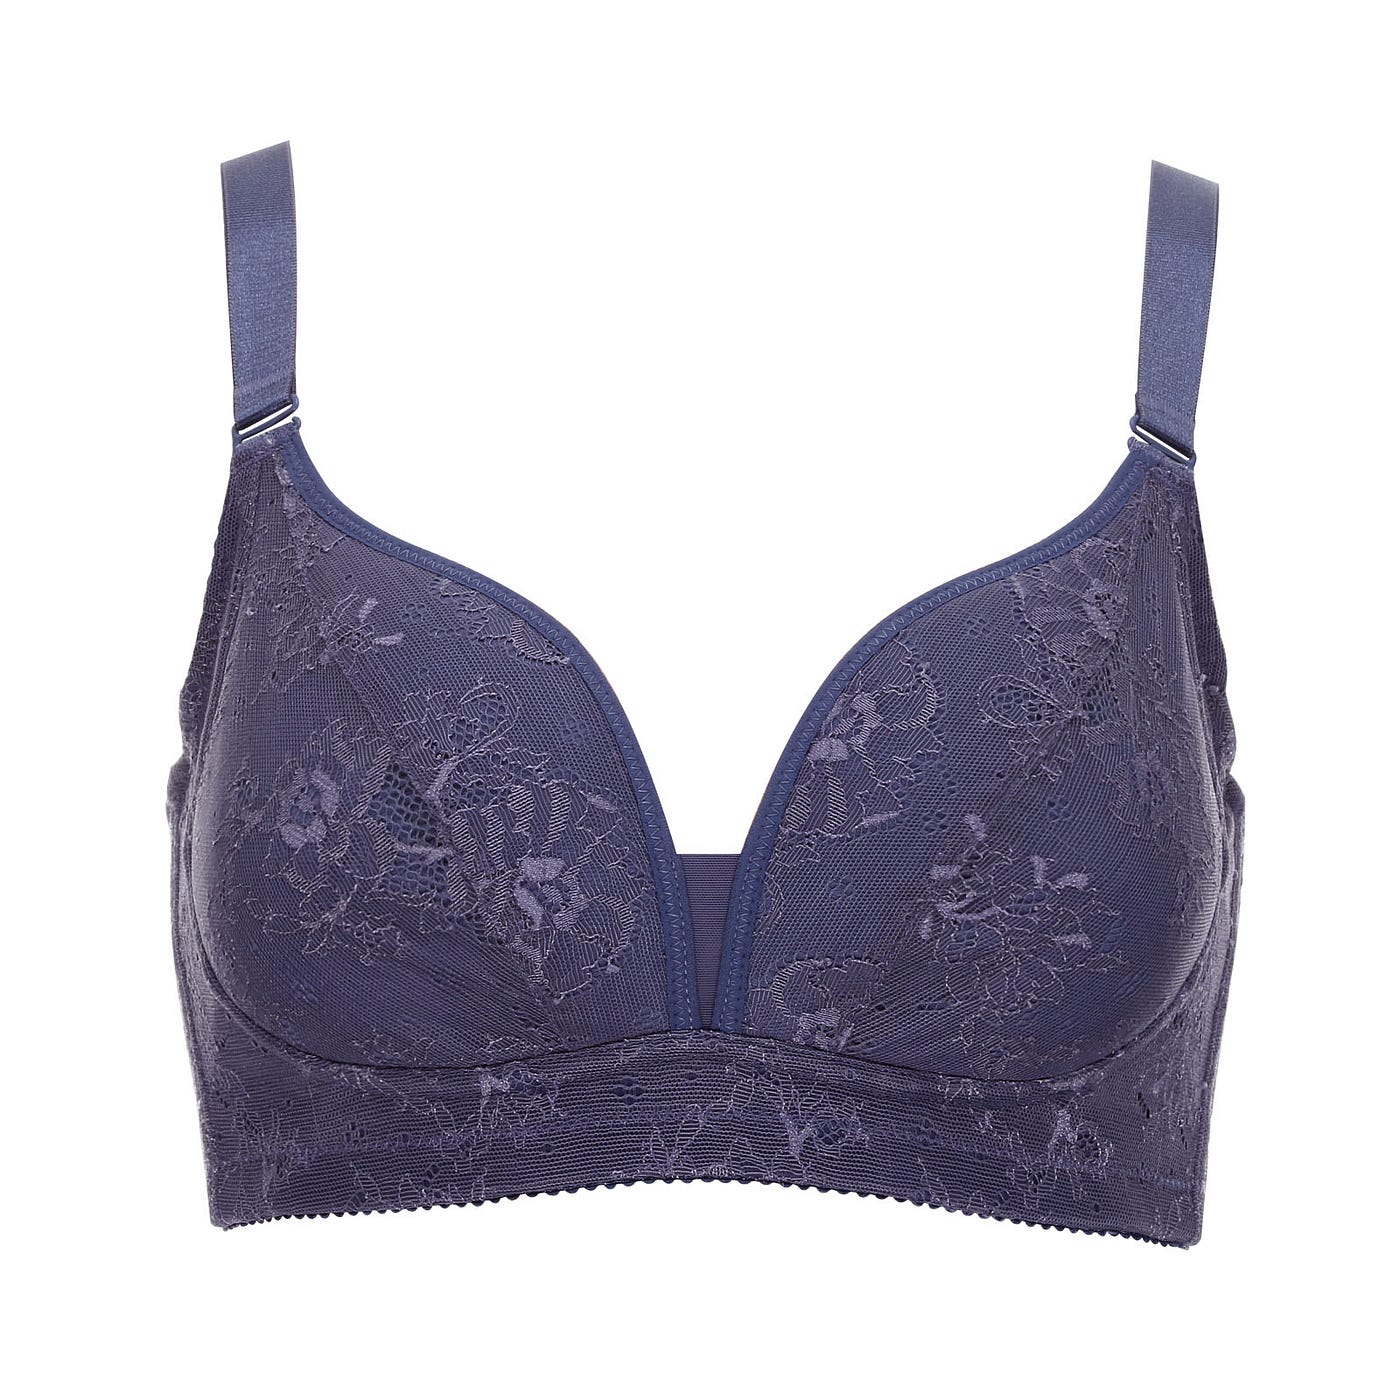 A Guide to Select the Ideal Bra for a Specific Cup Size